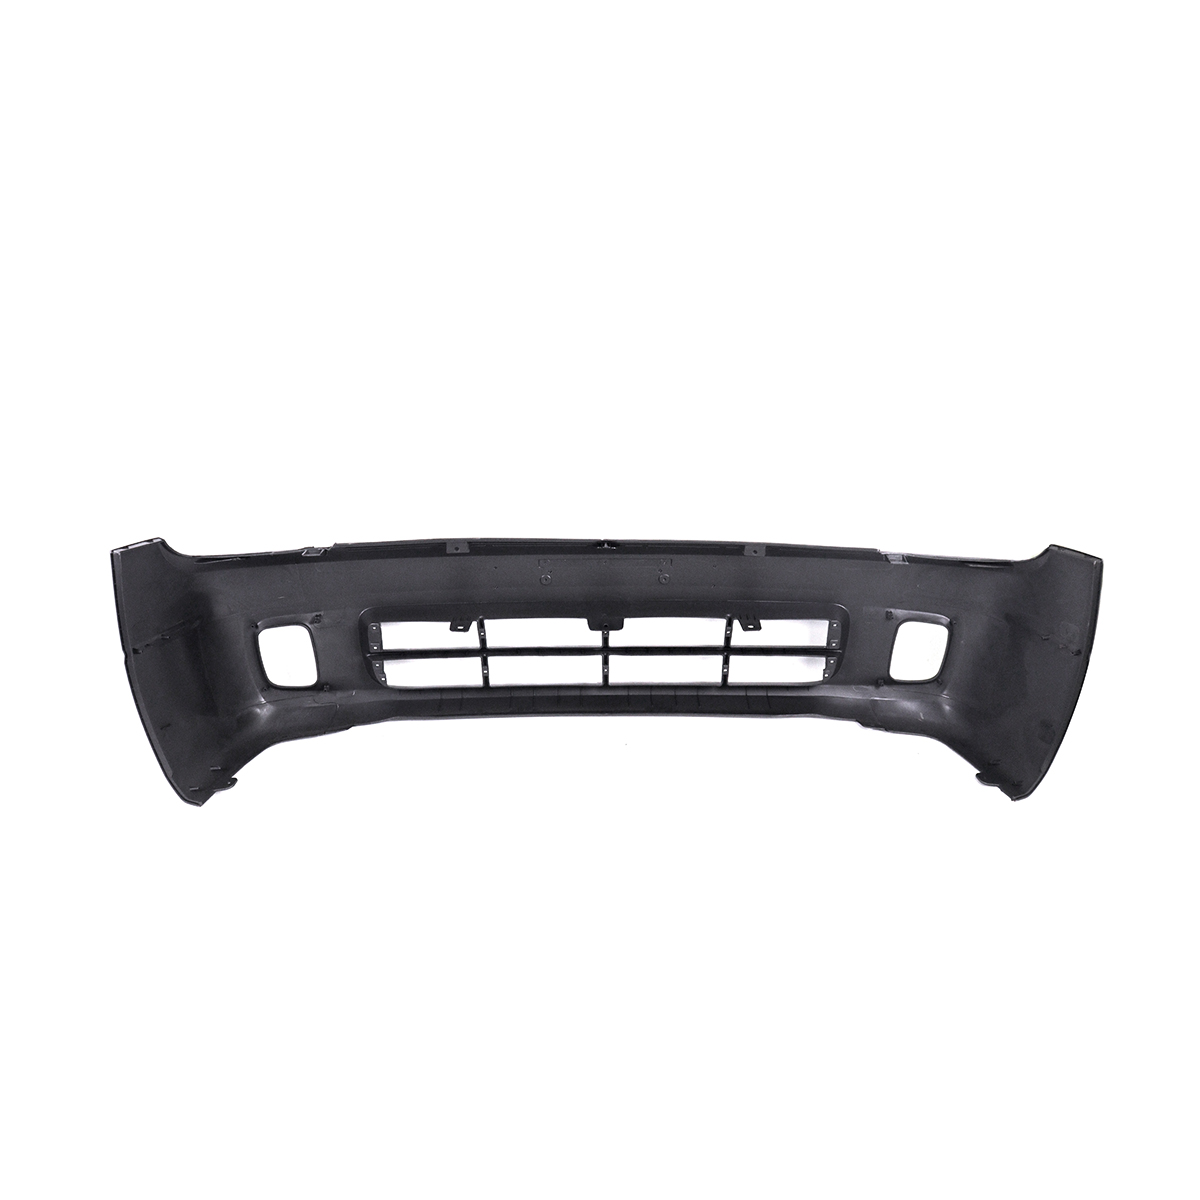 Geling High Quality Accessories Auto Parts Front Bumper For KIA Bongo 3